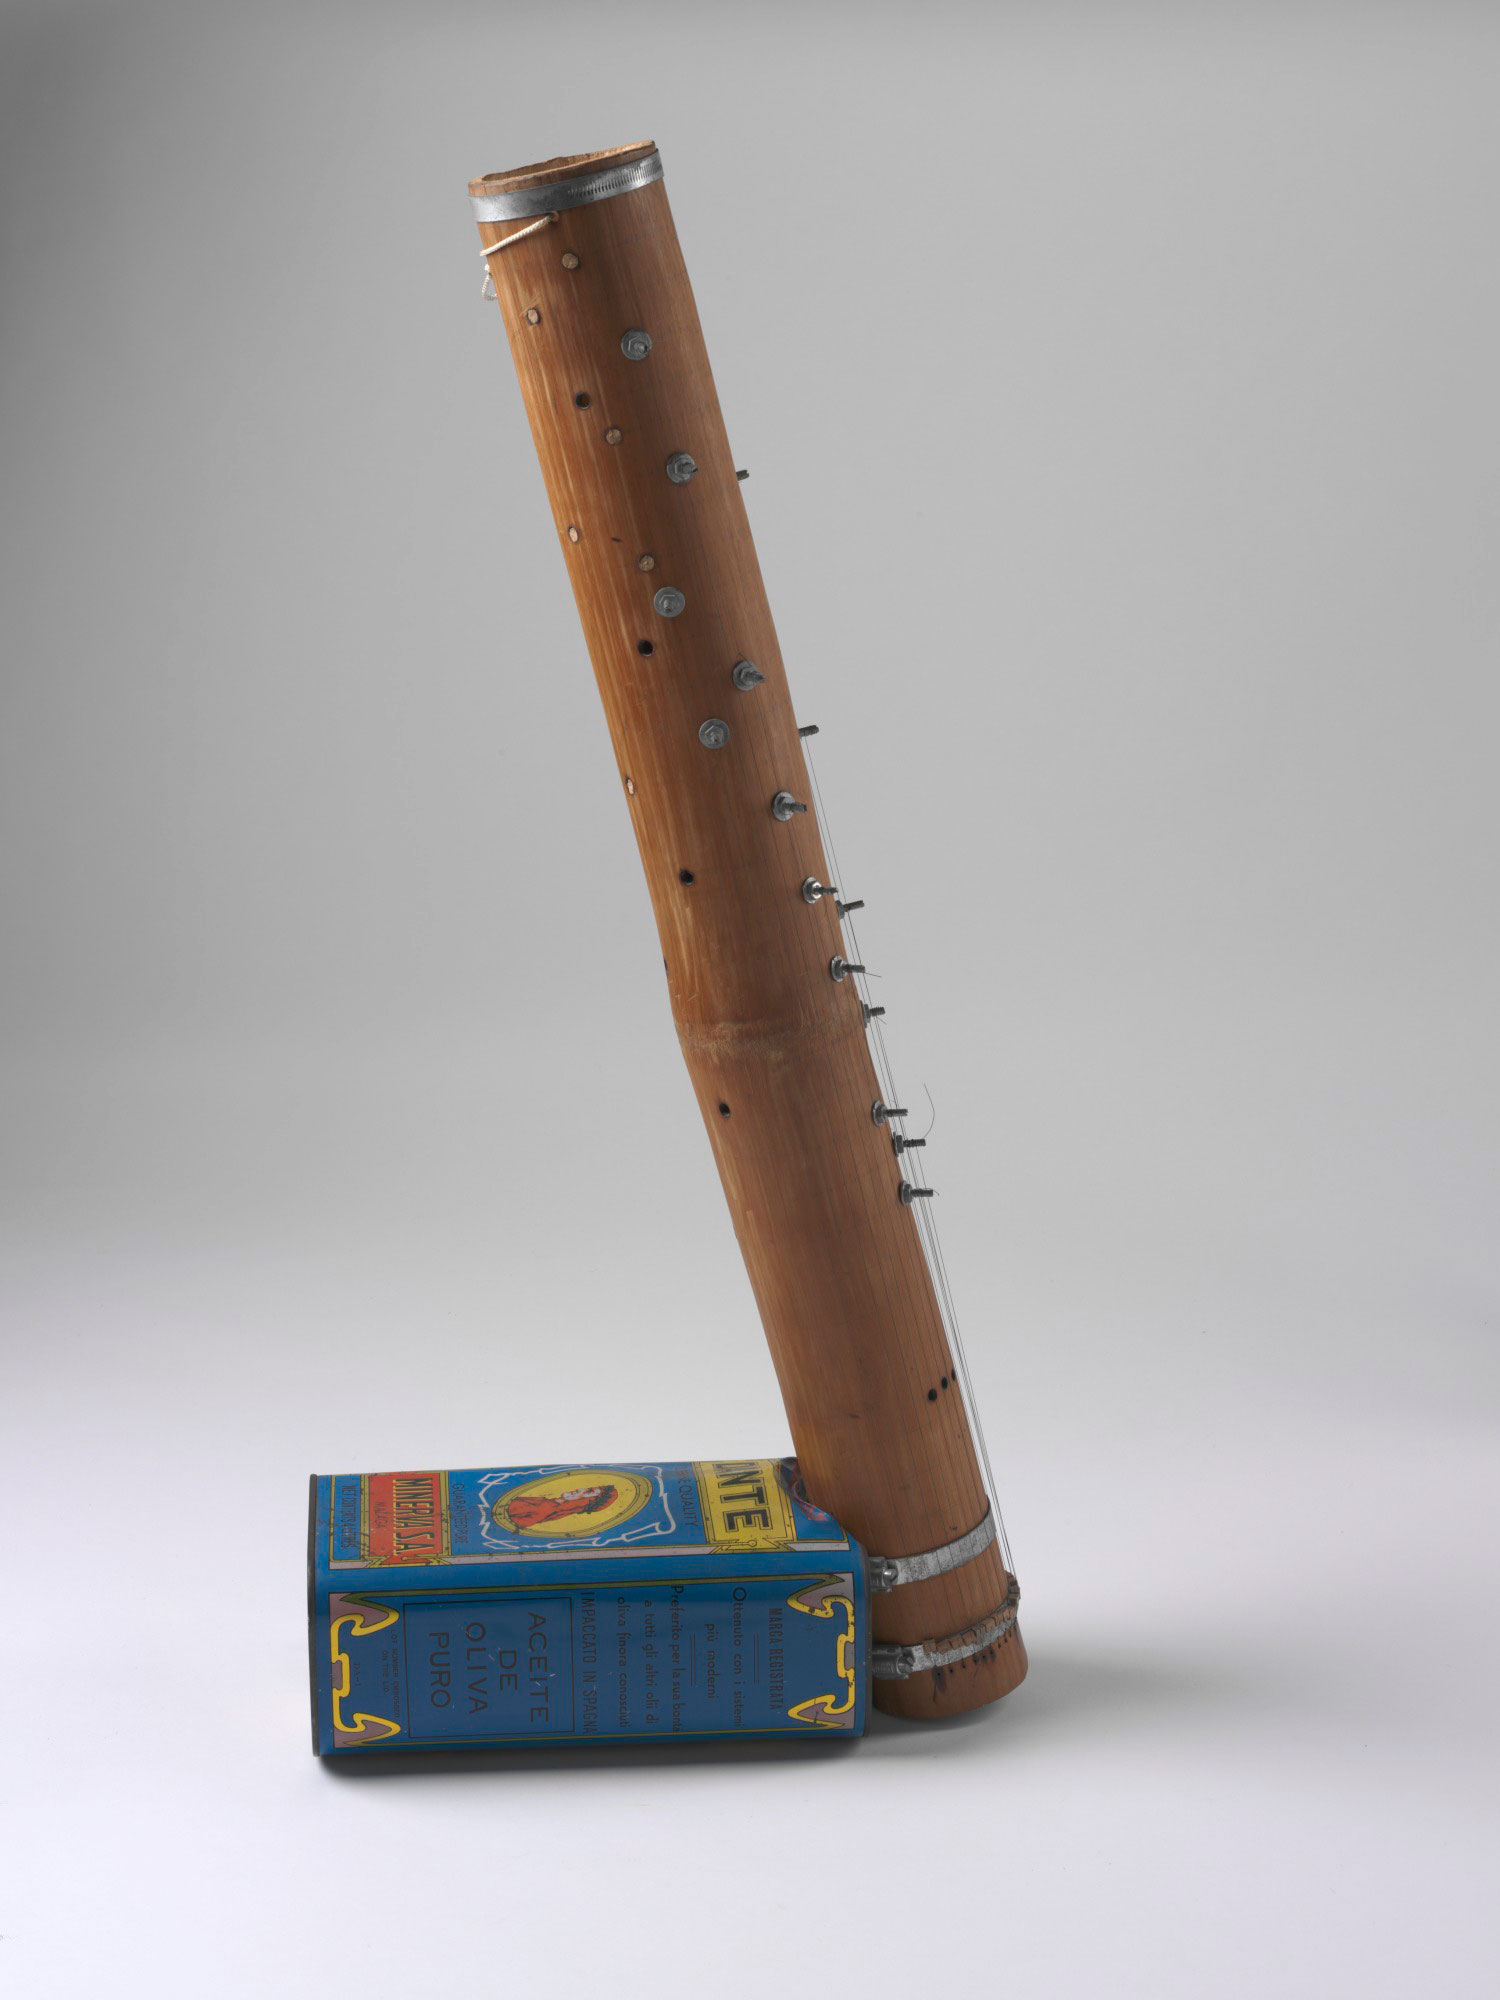 Bamboo hybrid stringed musical instrument called a ‘dan tre’.